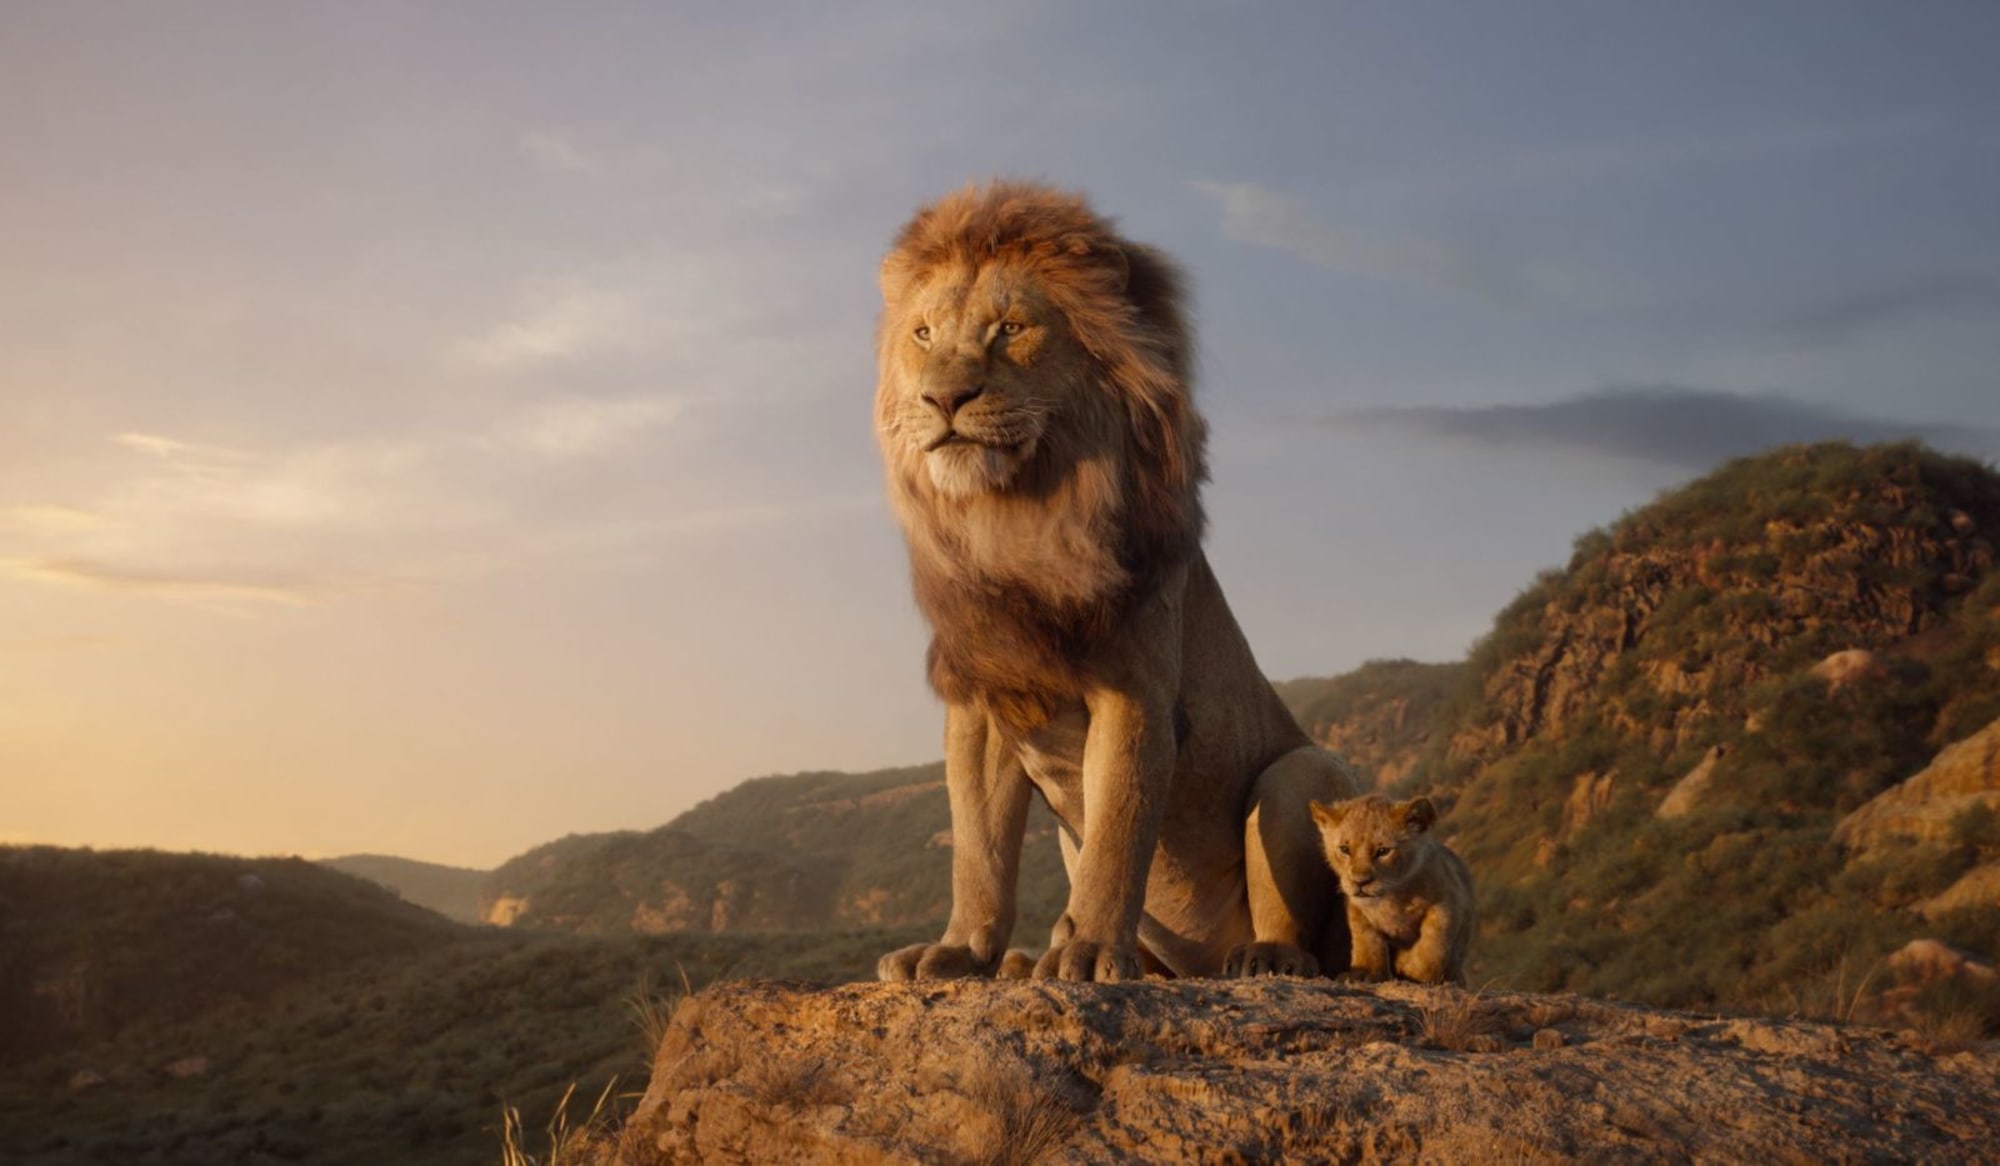 Mufasa The Lion King release date, cast, synopsis and more